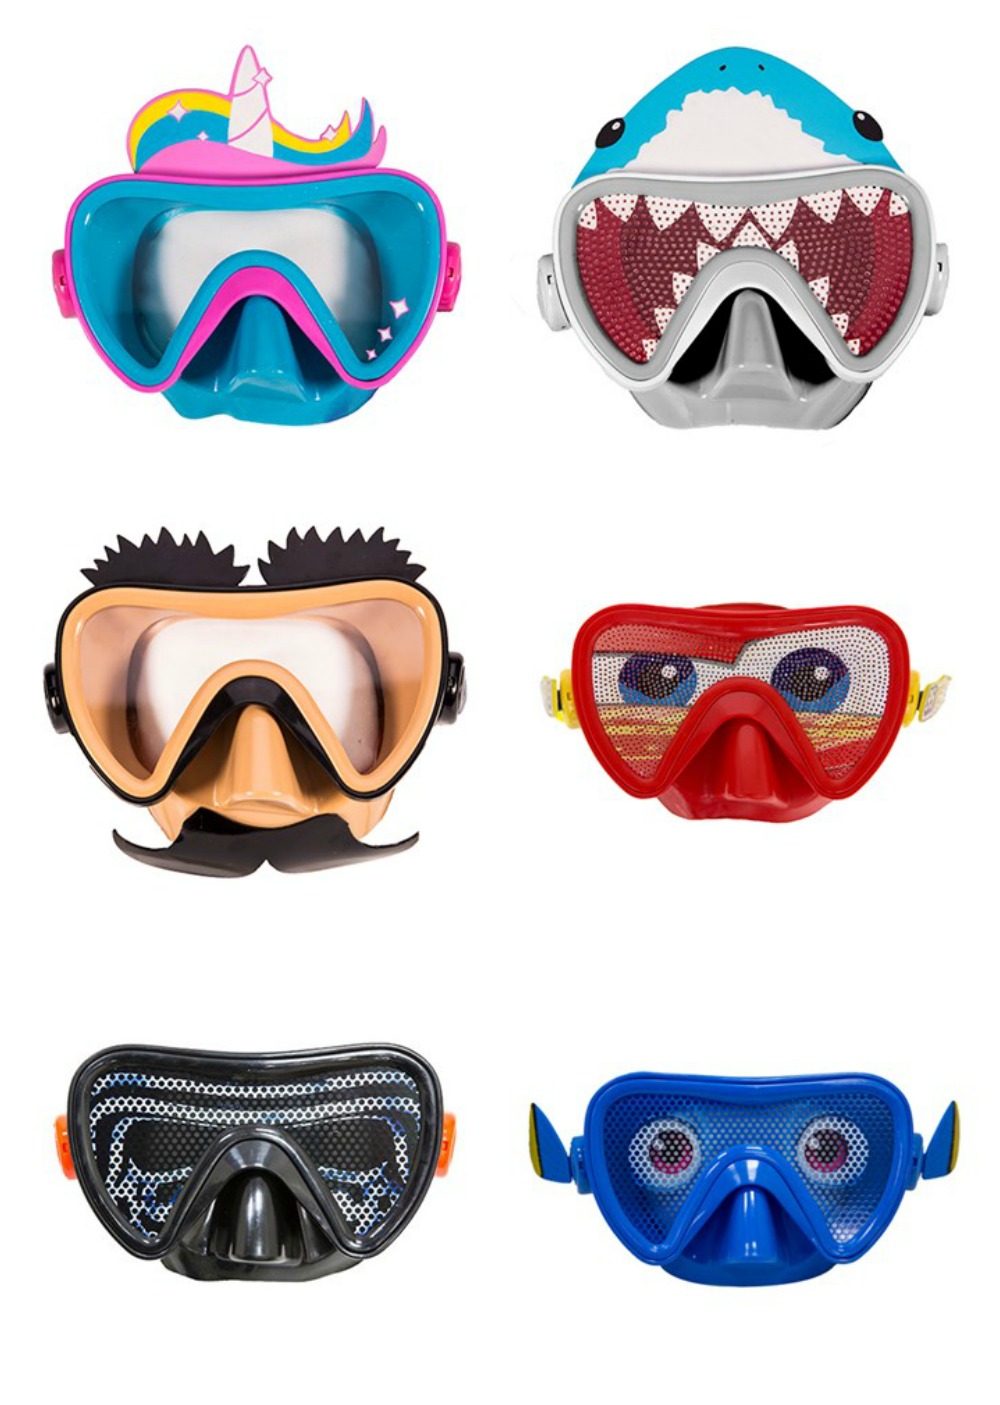 Silly swim masks that will be all the talk around the pool this summer